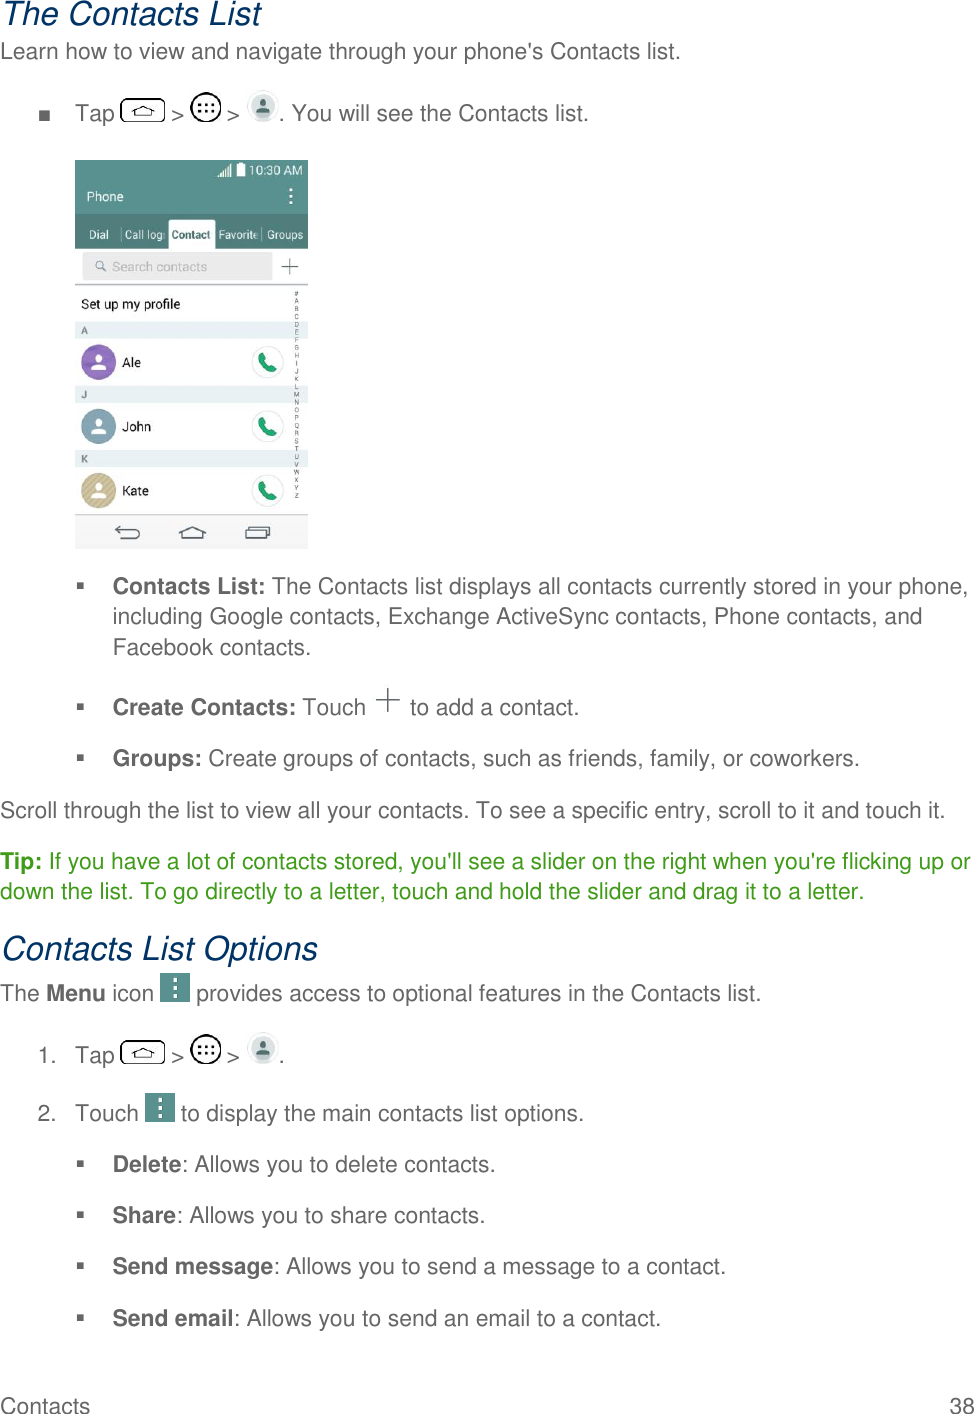 Contacts  38 The Contacts List Learn how to view and navigate through your phone&apos;s Contacts list. ■  Tap   &gt;   &gt;  . You will see the Contacts list.    Contacts List: The Contacts list displays all contacts currently stored in your phone, including Google contacts, Exchange ActiveSync contacts, Phone contacts, and Facebook contacts.  Create Contacts: Touch   to add a contact.  Groups: Create groups of contacts, such as friends, family, or coworkers. Scroll through the list to view all your contacts. To see a specific entry, scroll to it and touch it. Tip: If you have a lot of contacts stored, you&apos;ll see a slider on the right when you&apos;re flicking up or down the list. To go directly to a letter, touch and hold the slider and drag it to a letter. Contacts List Options The Menu icon   provides access to optional features in the Contacts list. 1.  Tap   &gt;   &gt;  . 2.  Touch   to display the main contacts list options.  Delete: Allows you to delete contacts.   Share: Allows you to share contacts.   Send message: Allows you to send a message to a contact.   Send email: Allows you to send an email to a contact.  